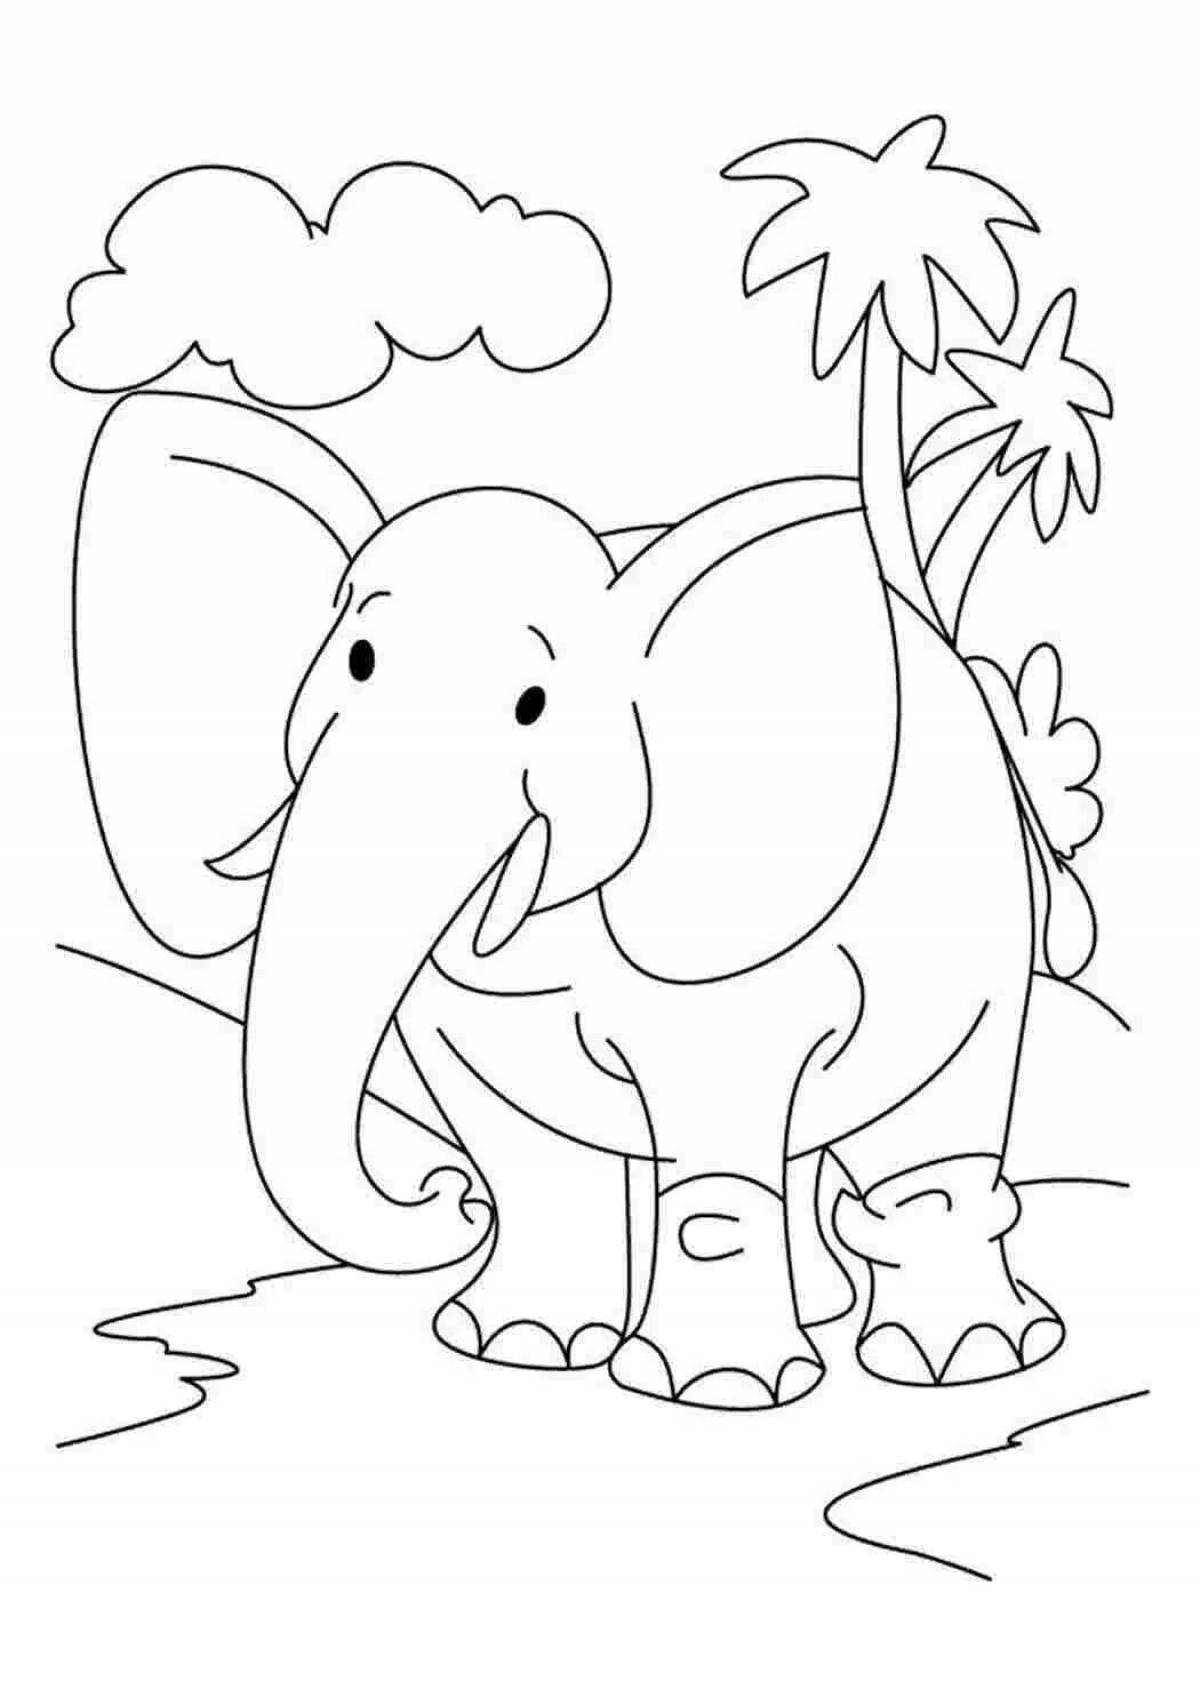 Animated elephant coloring page